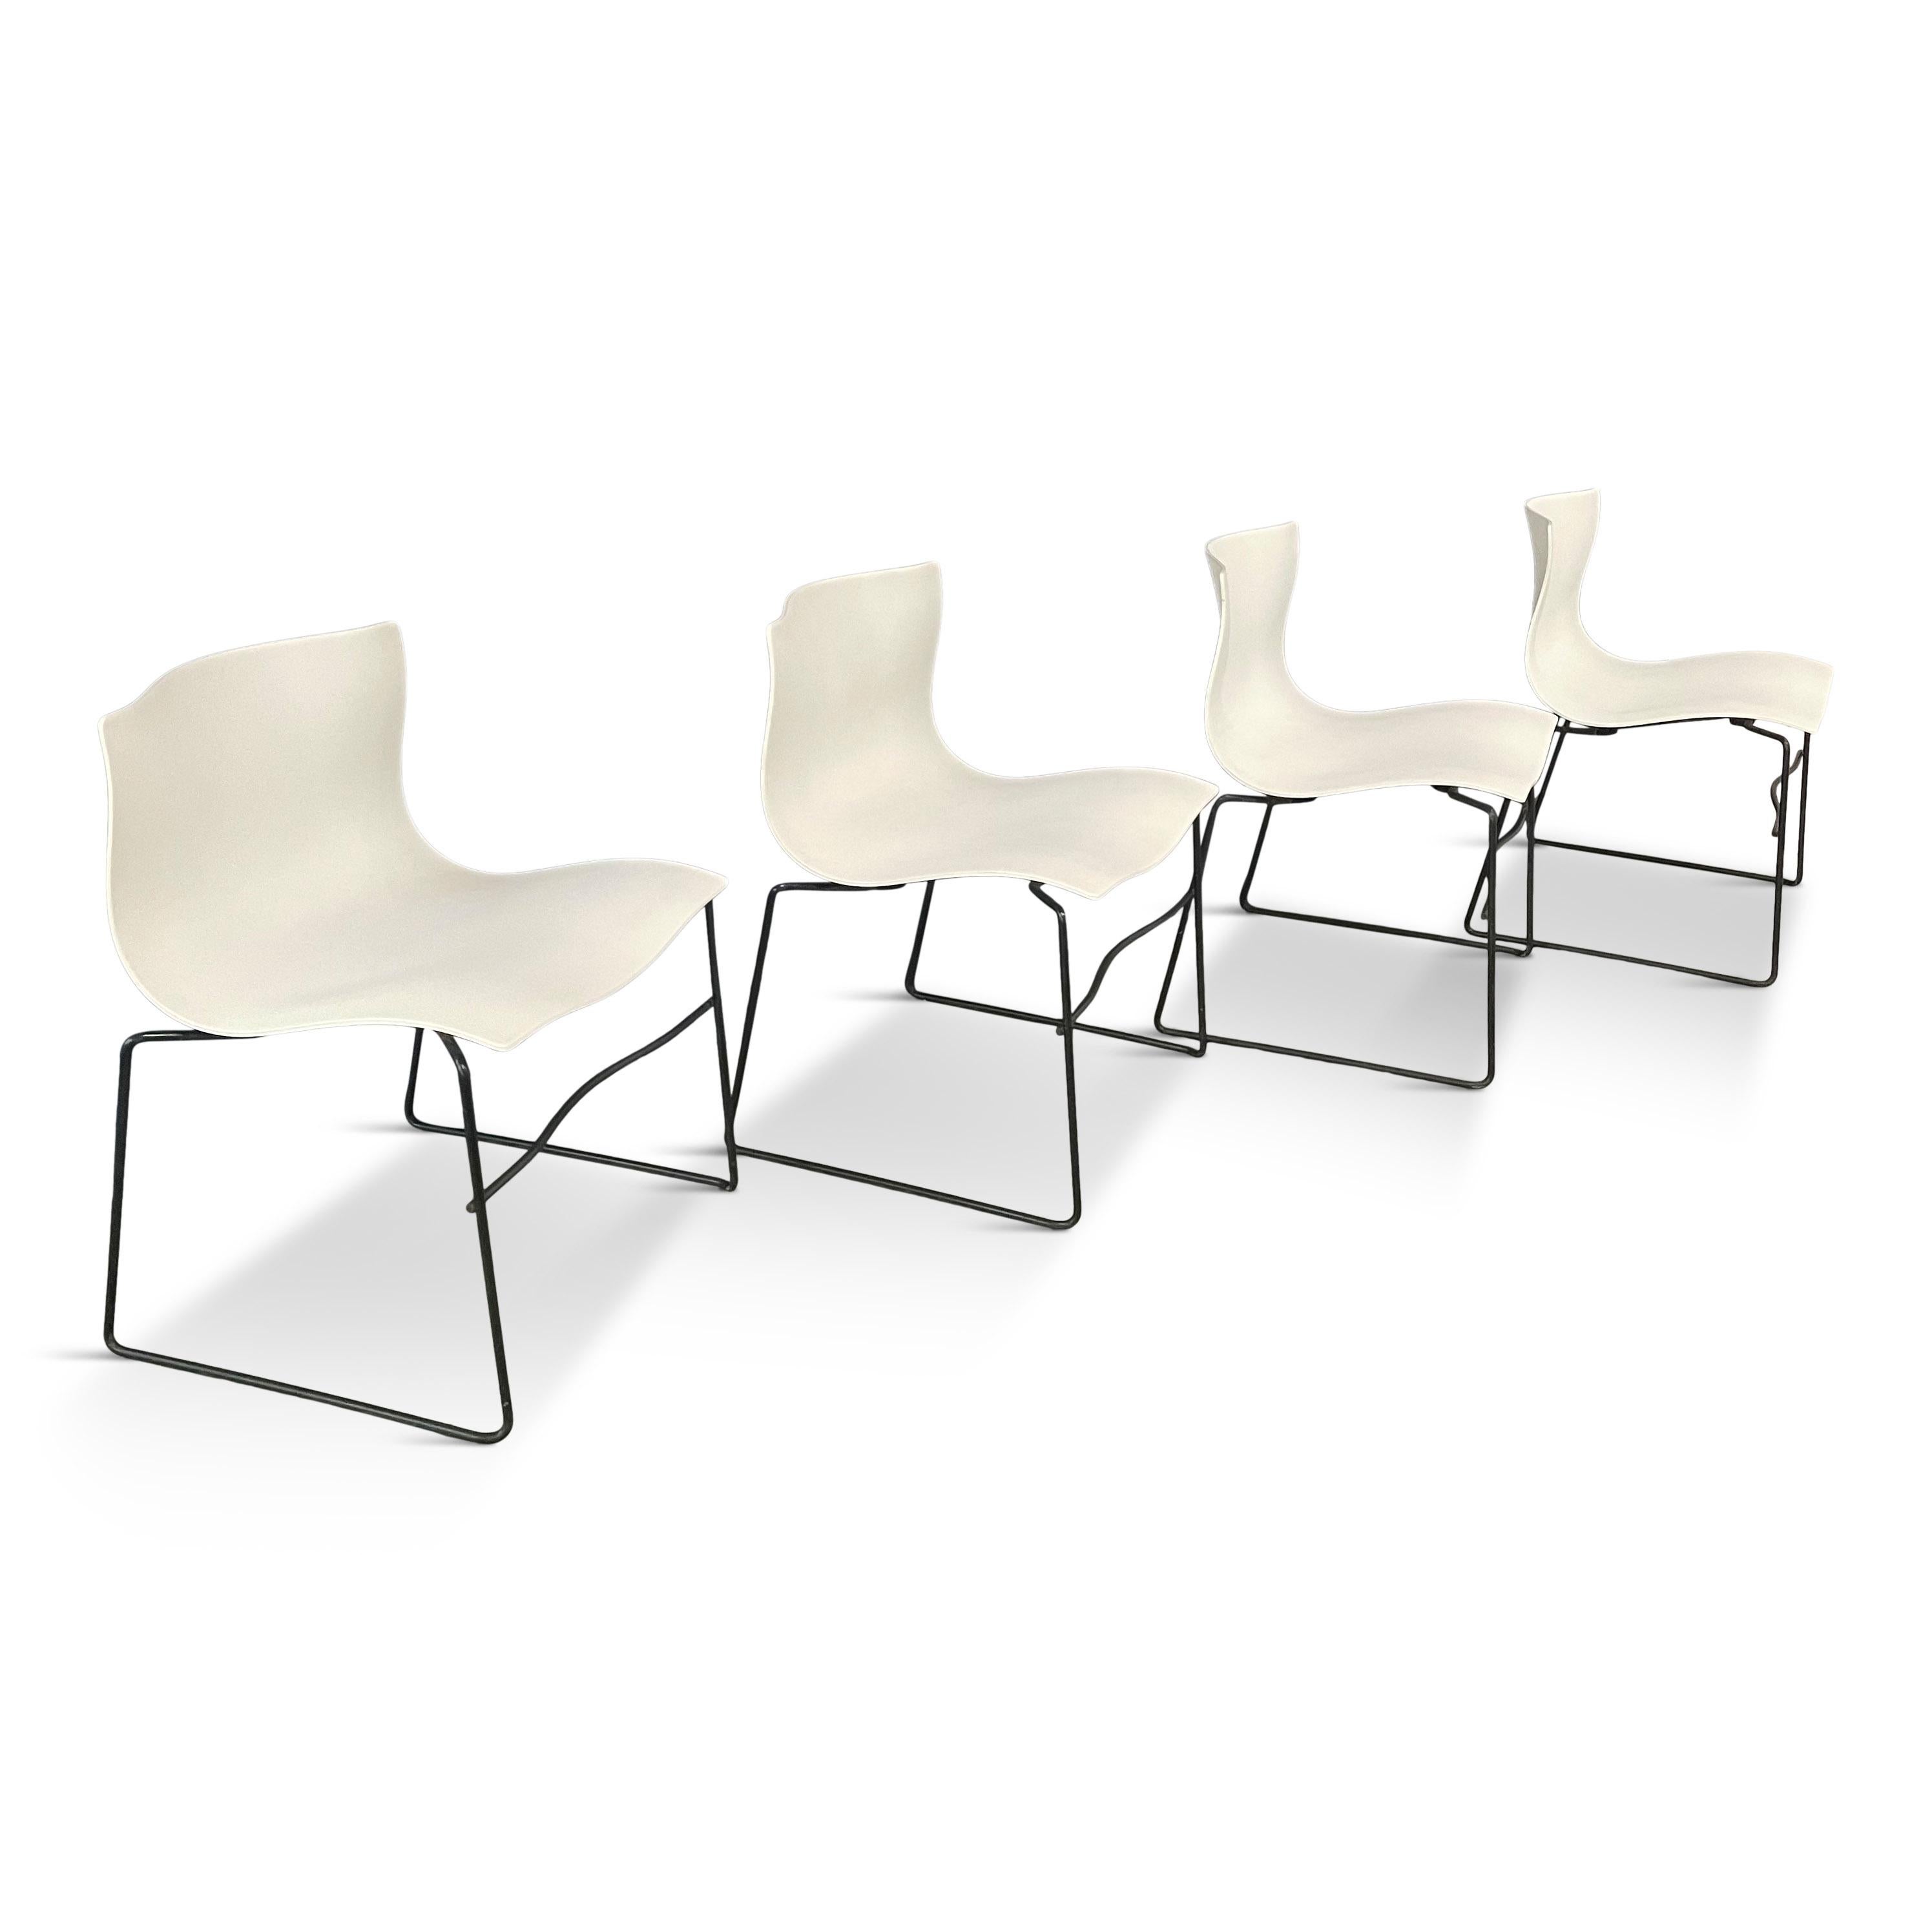 European Handkerchief Chairs in White by Massimo Vignelli for Knoll Post Modern a Pair For Sale